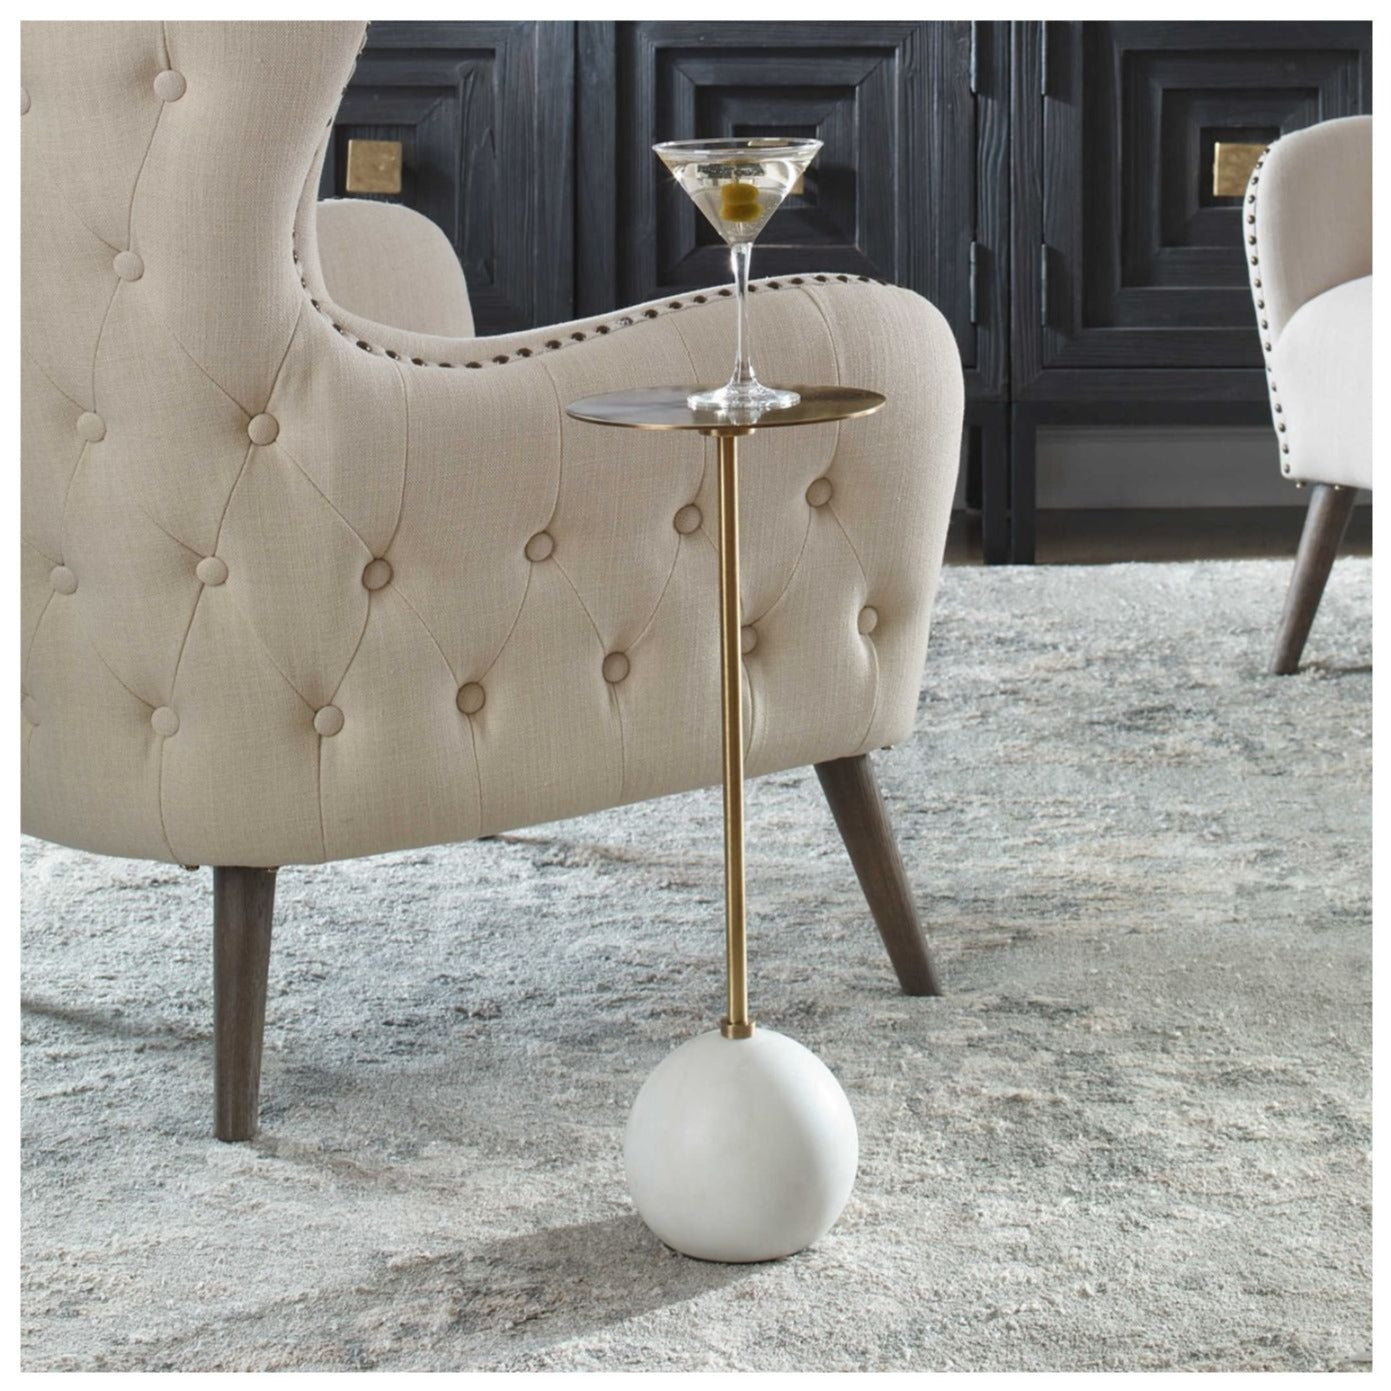 Shows this round marble based drink table with brass stem and round brass top beside a chair. Martini sitting on table.